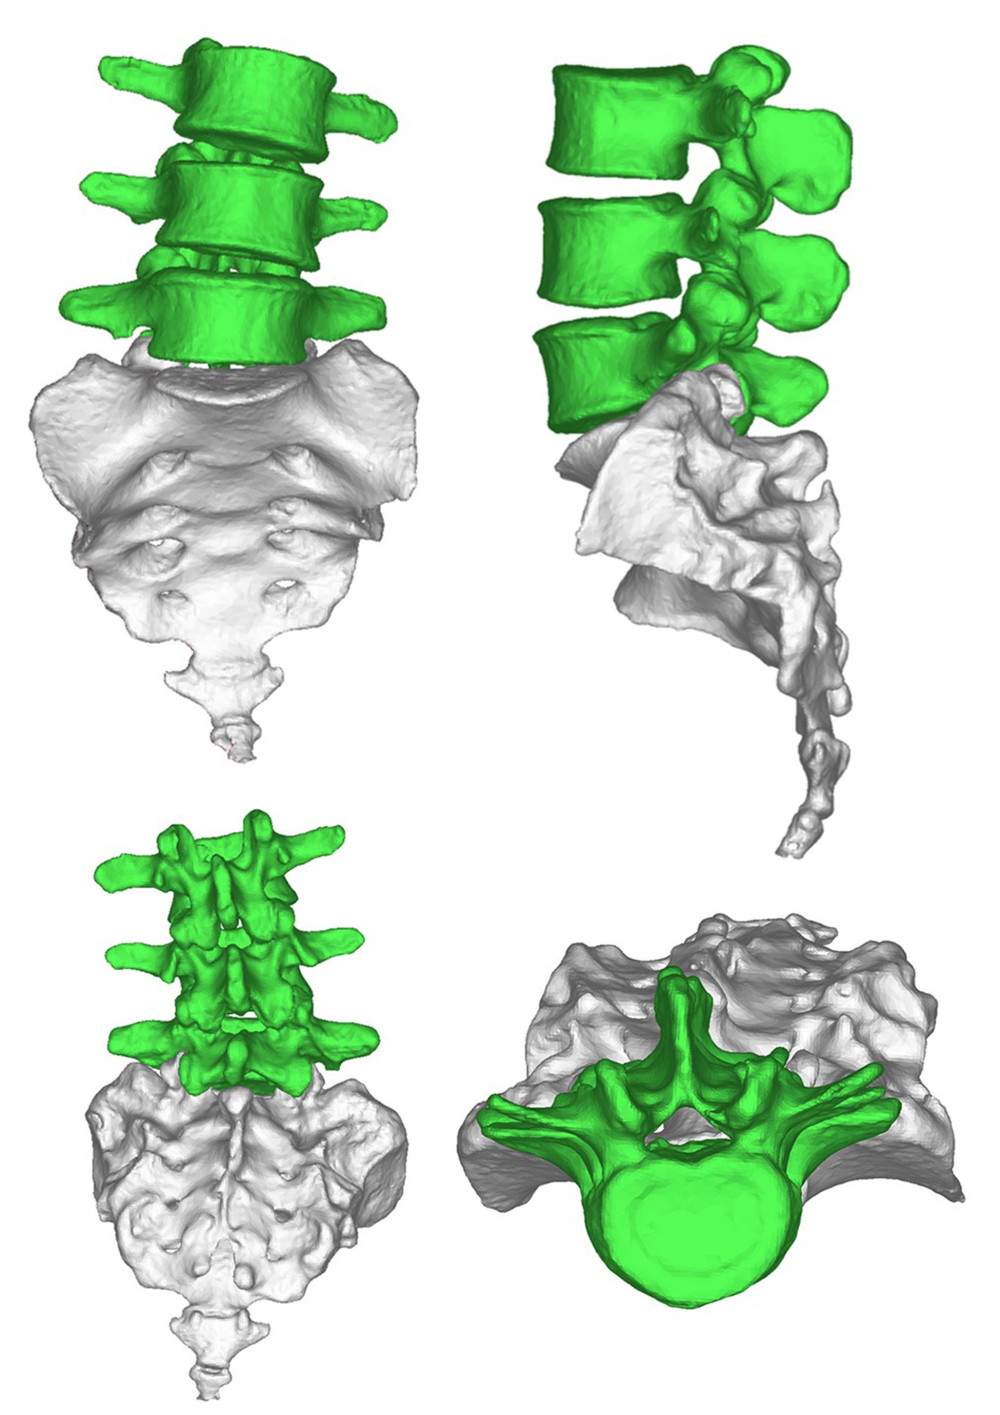 The spinal image after 3-dimensional reconstruction.